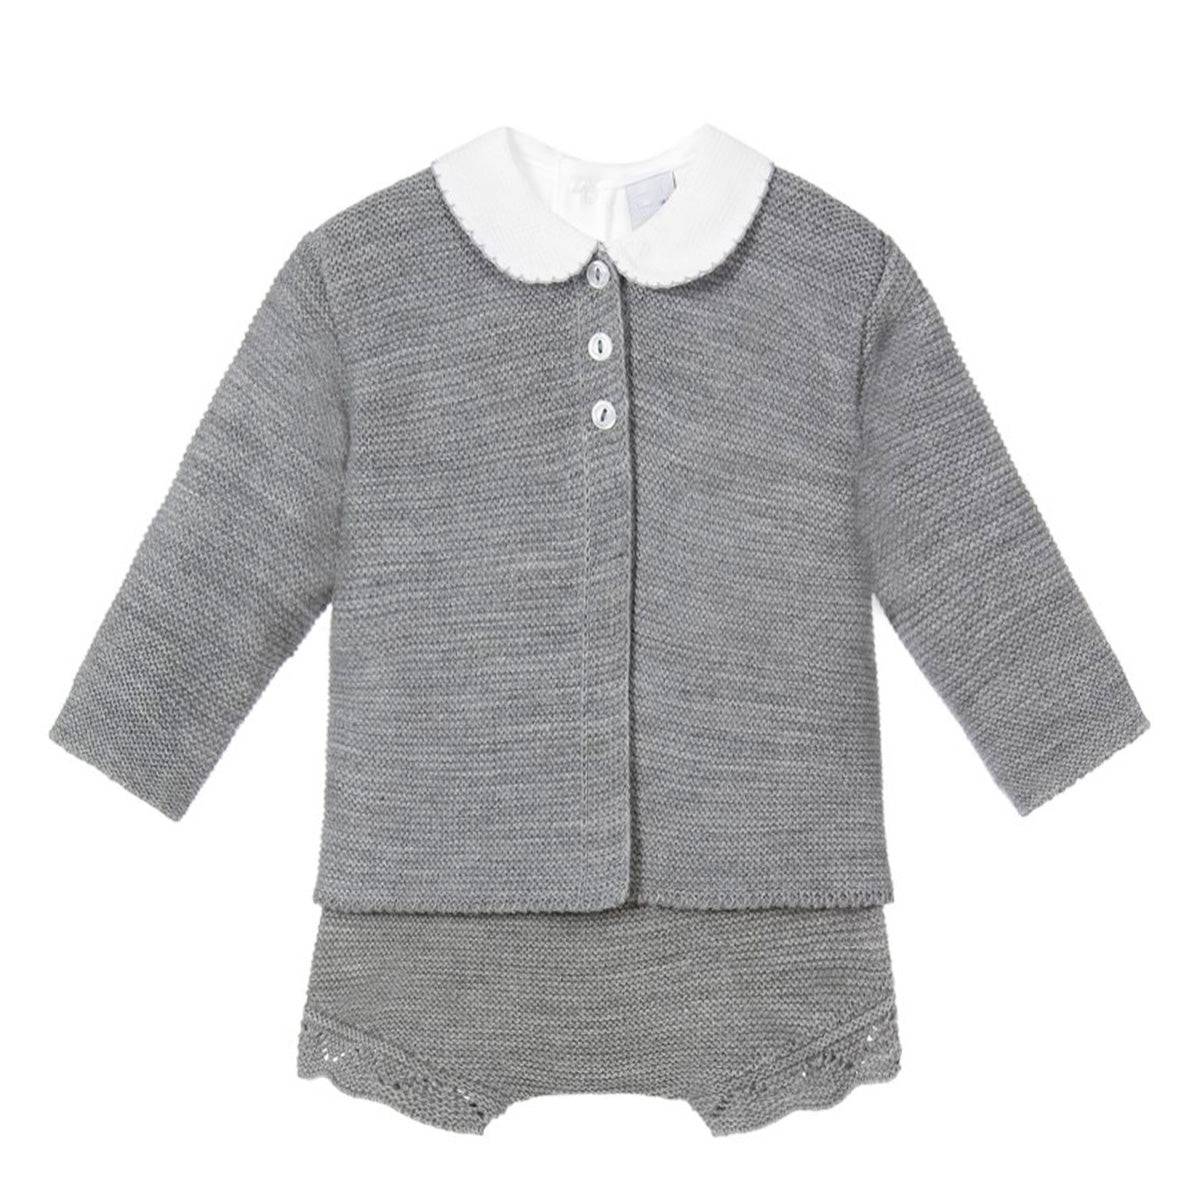 Babidu 3m Grey 3-Piece Knitted Shorts Outfit